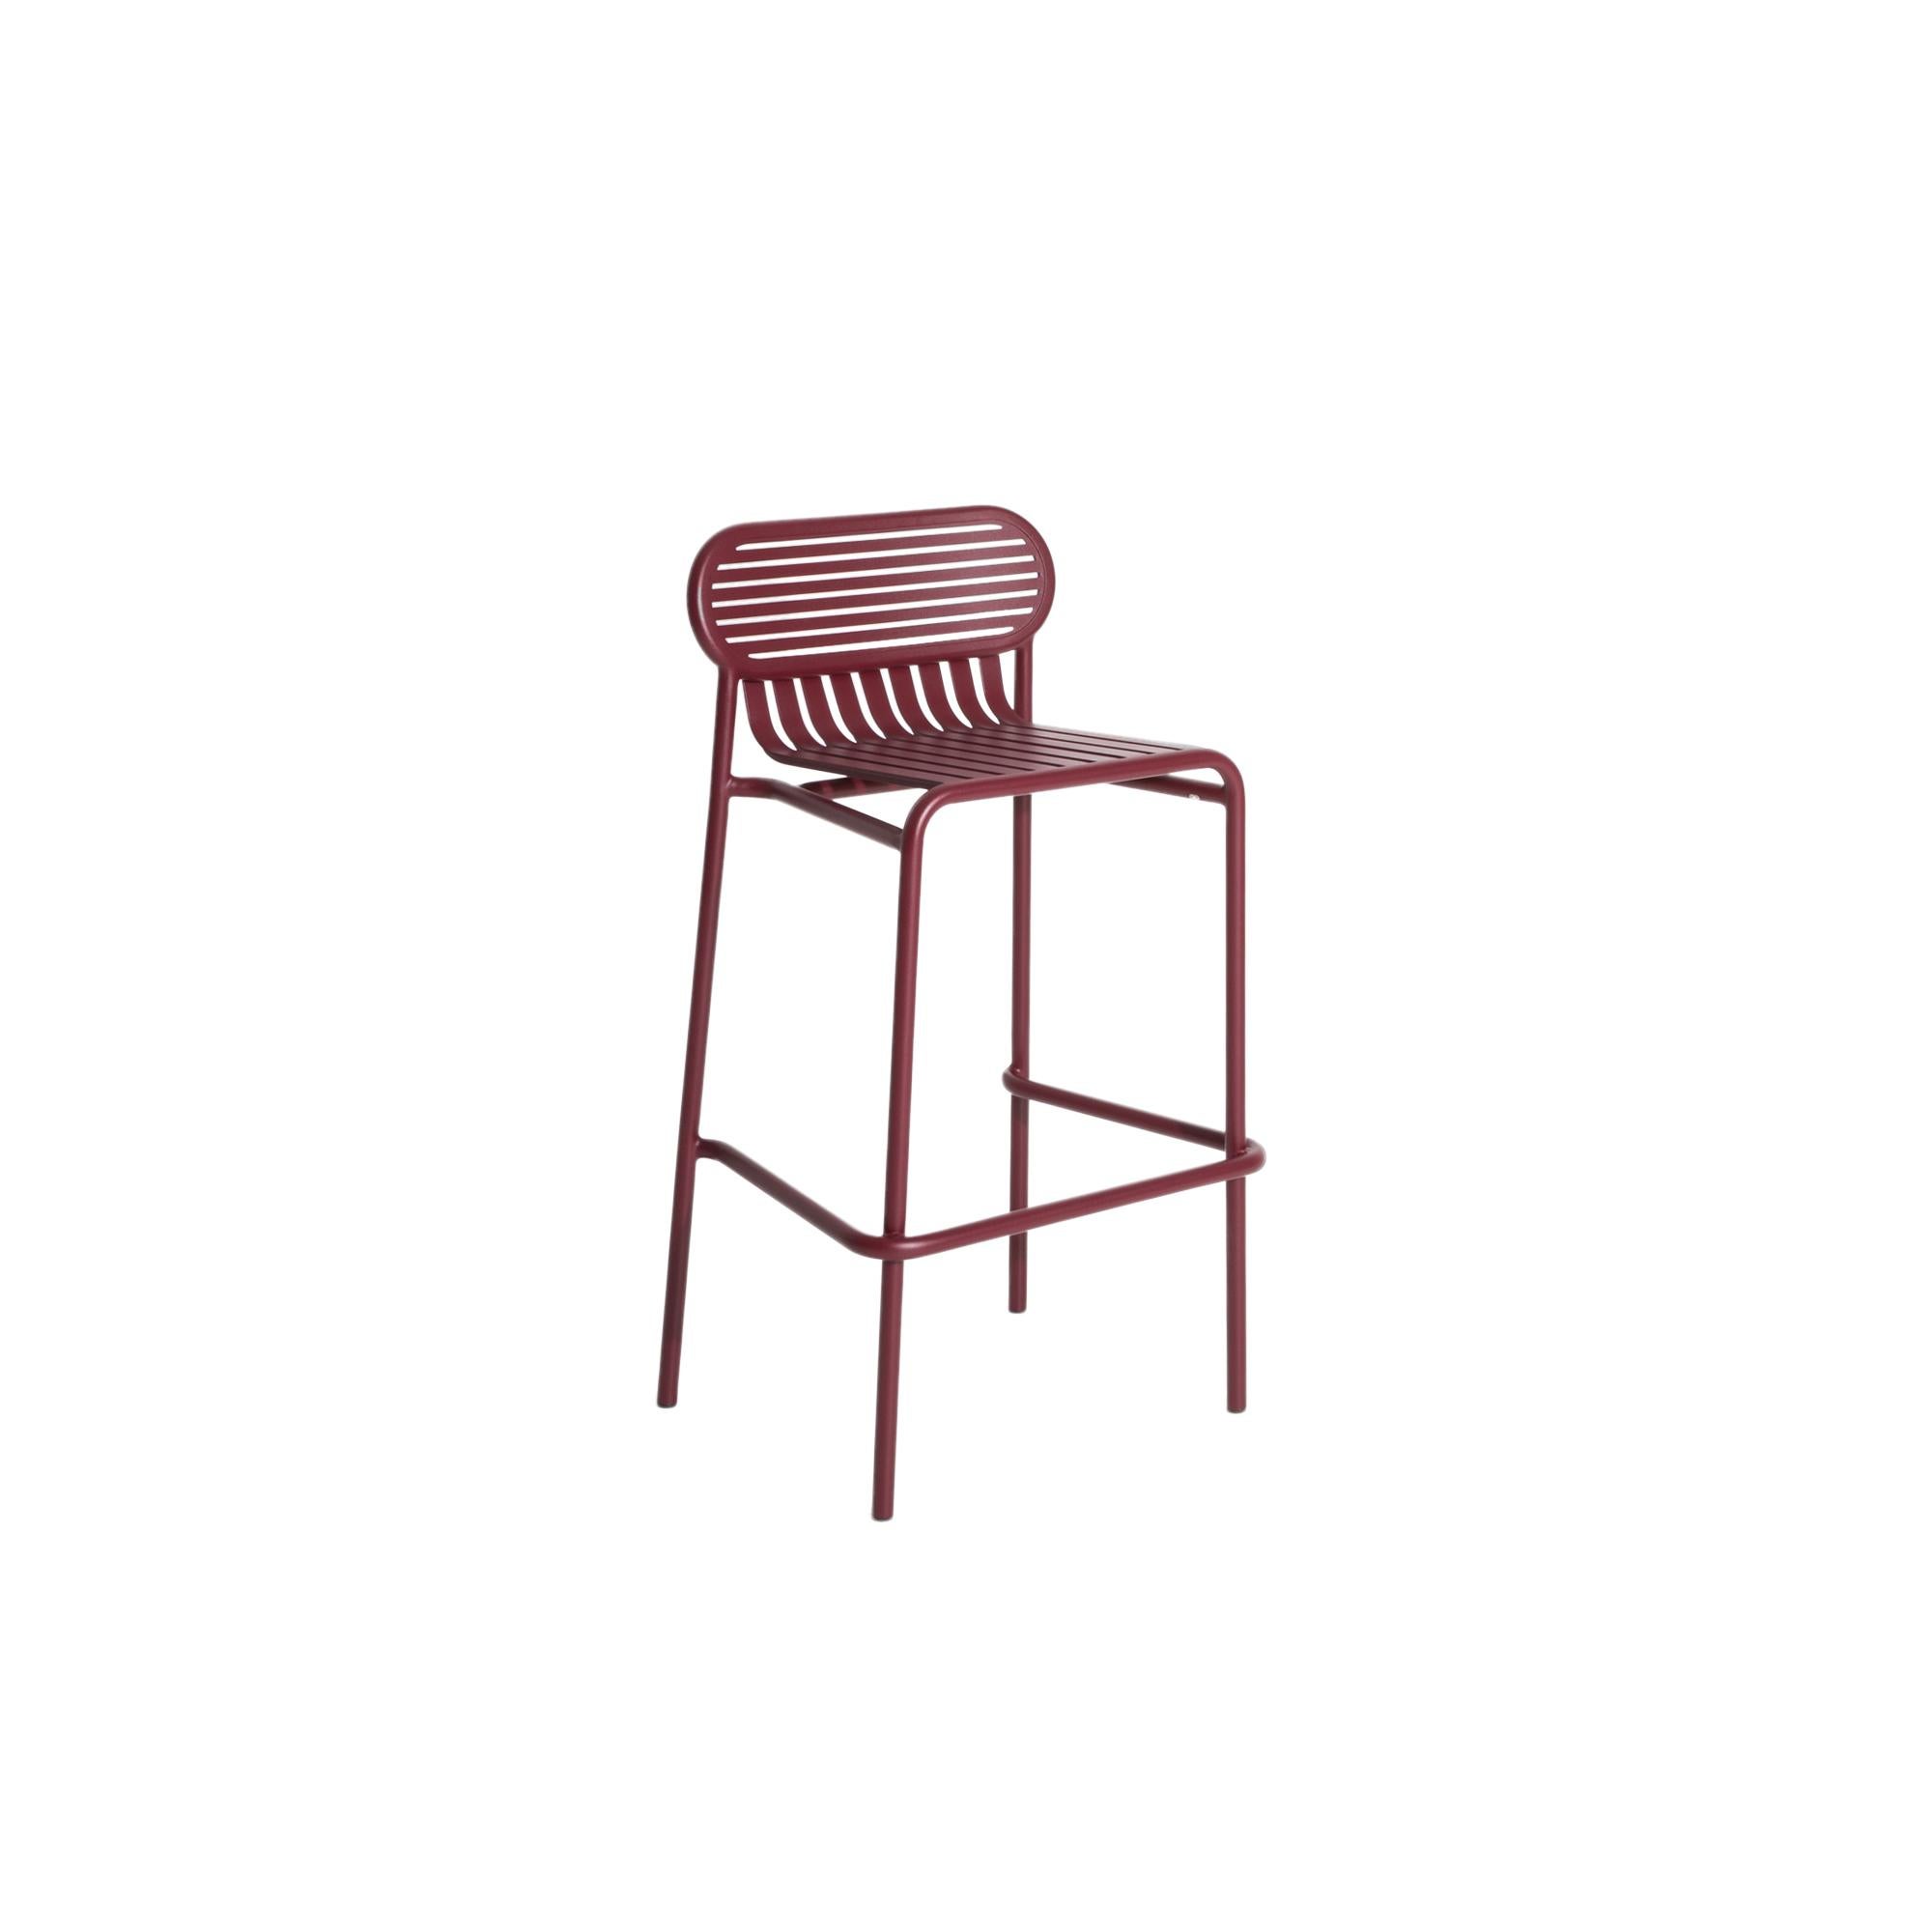 Petite Friture Week-End Bar Stool in Burgundy Aluminium by Studio BrichetZiegler, 2017

The week-end collection is a full range of outdoor furniture, in aluminium grained epoxy paint, matt finish, that includes 18 functions and 8 colours for the